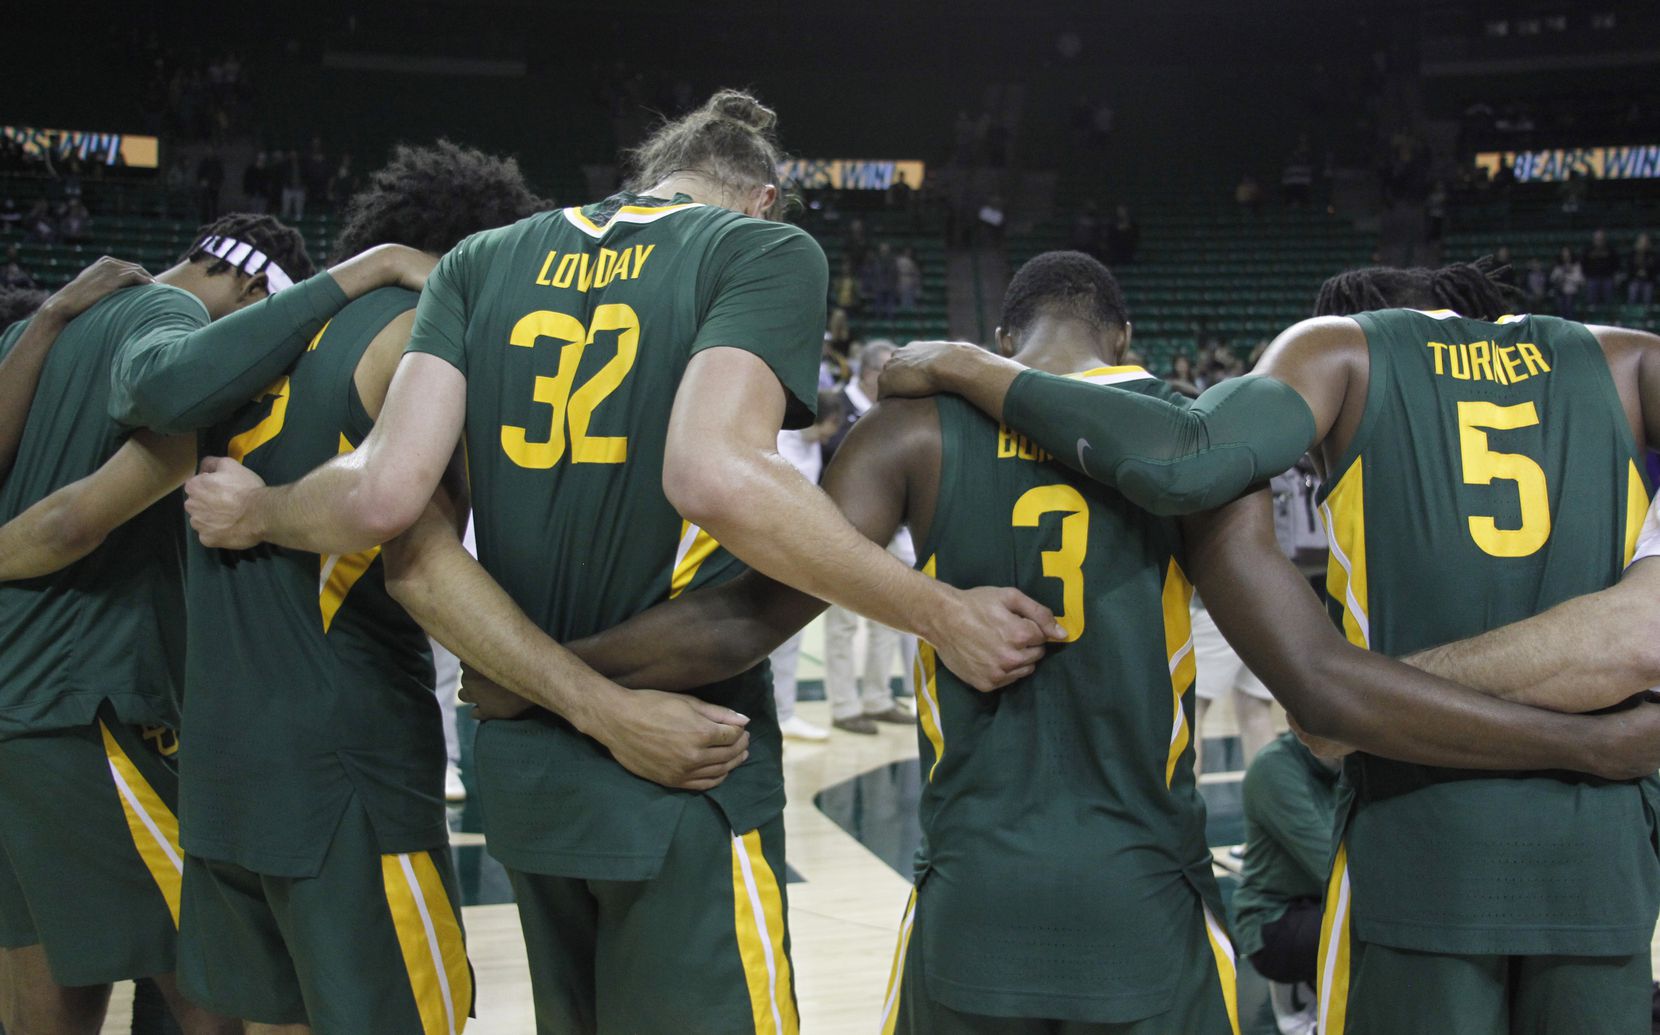 Baylor players and coaches gather at mid court for a post-game prayer following their win over Alcorn State. The two teams played their NCAA mens basketball game at Ferrell Center in Waco on December 20, 2021. (Steve Hamm/ Special Contributor)